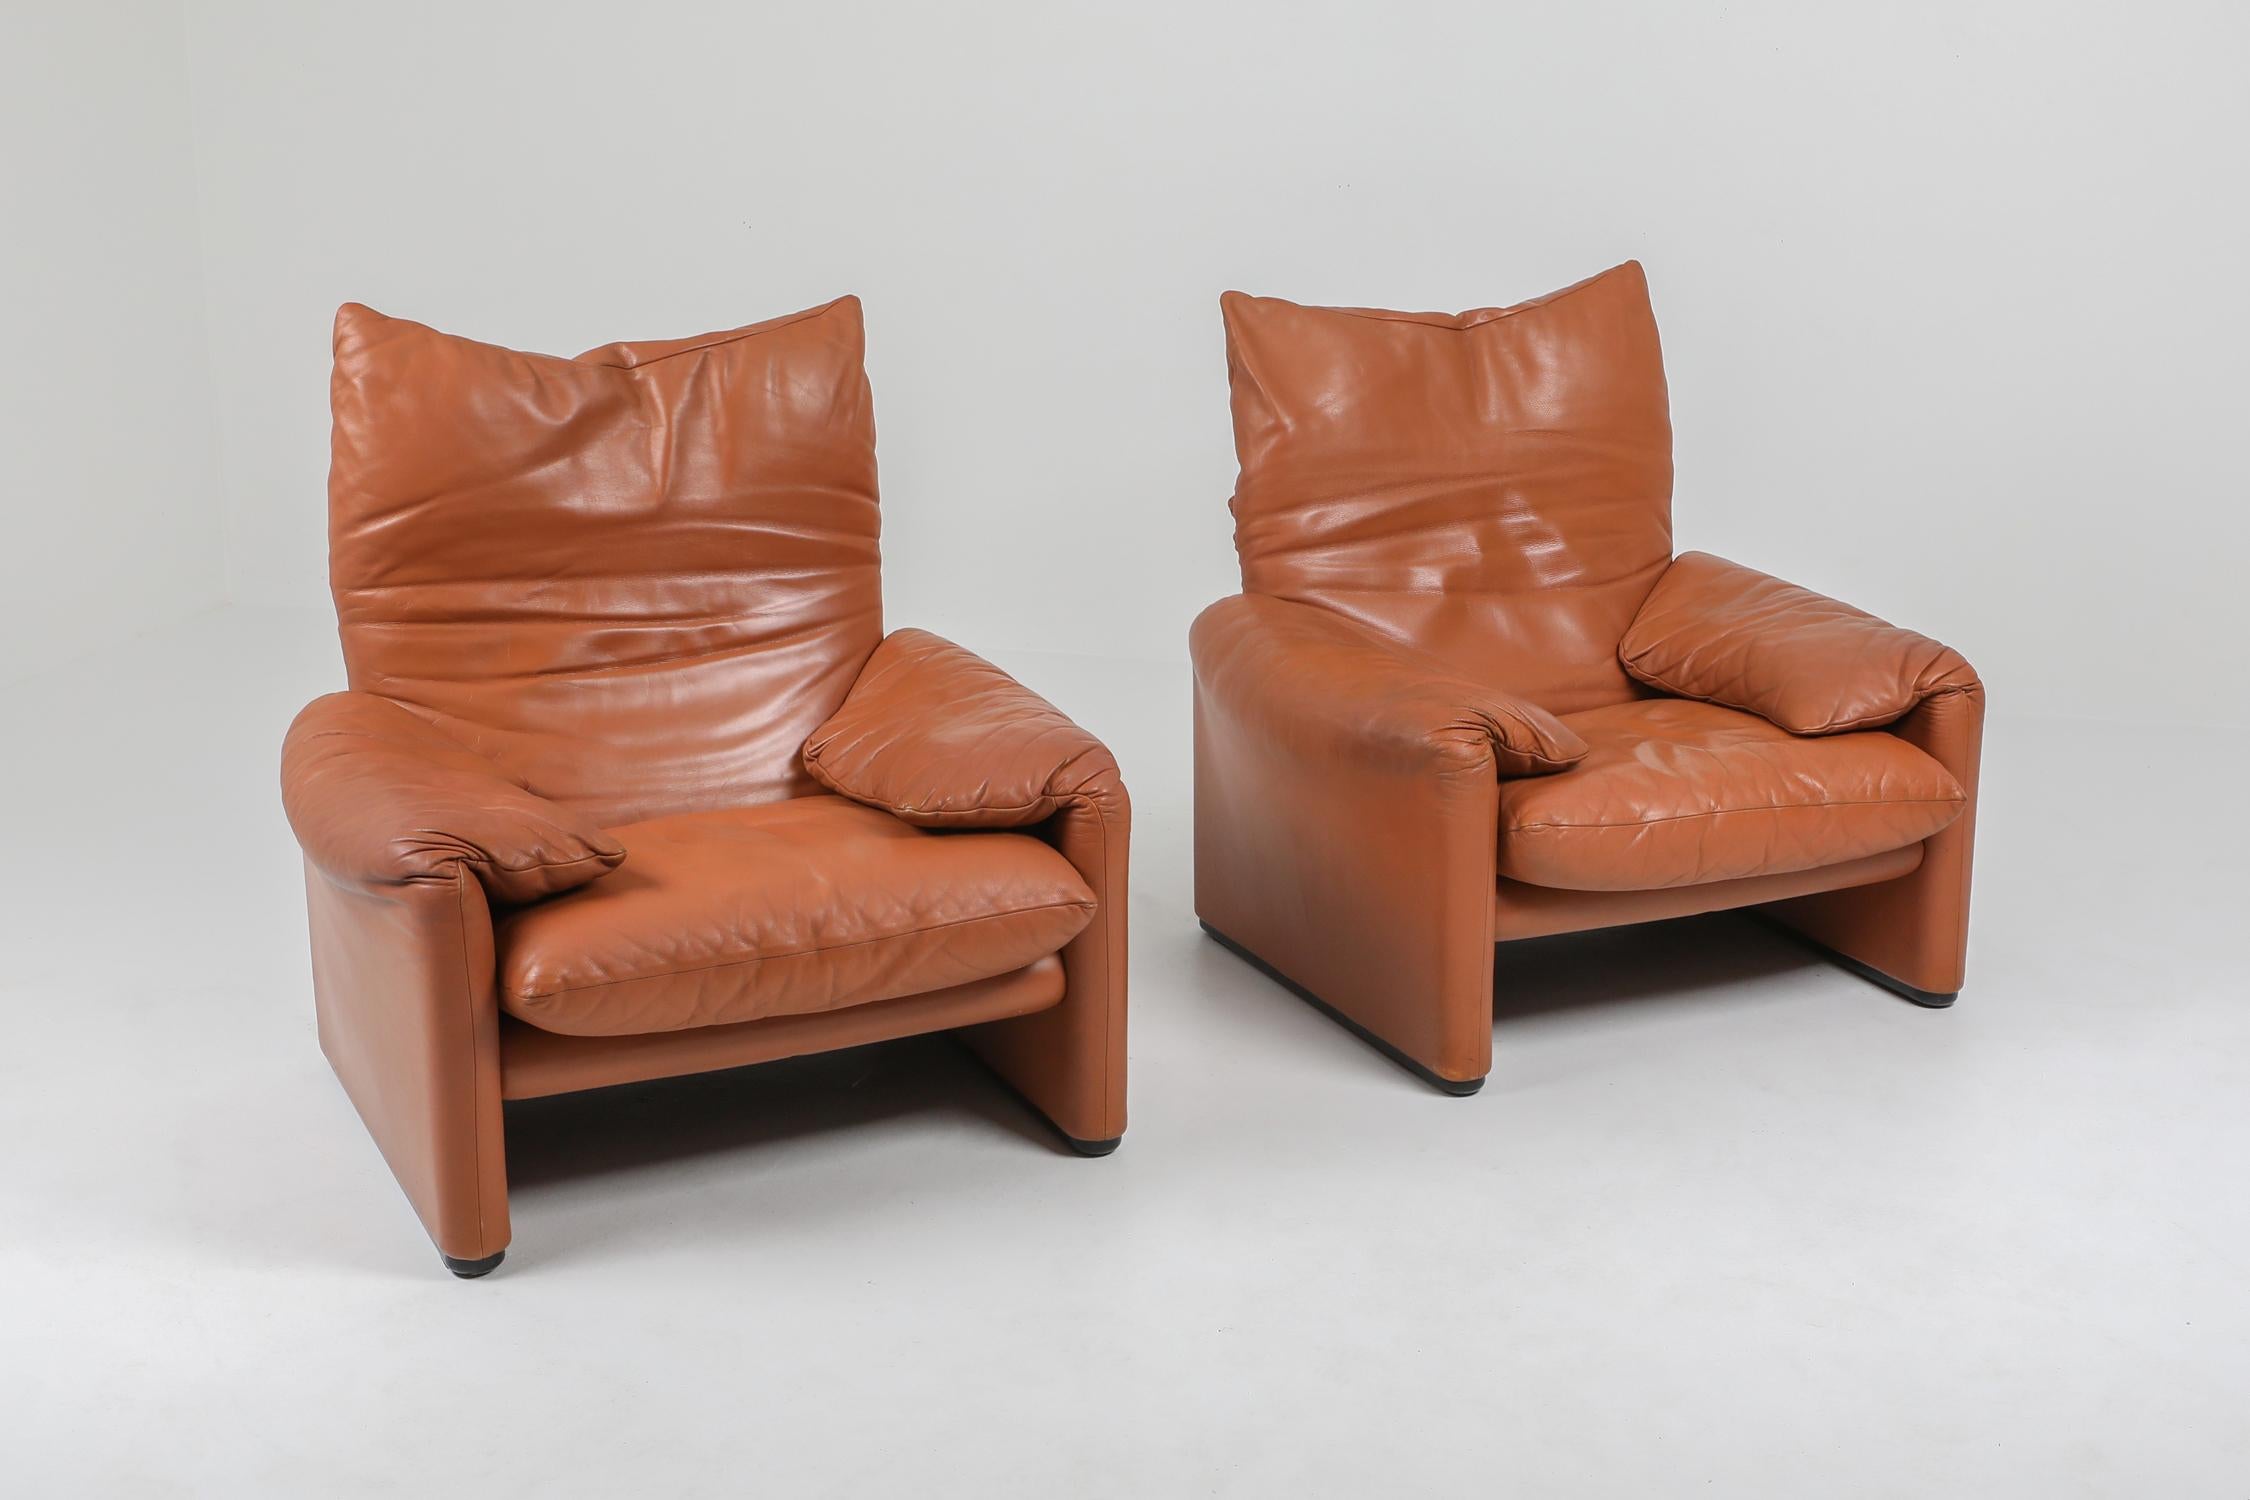 European Maralunga Cognac Leather Club Chairs by Vico Magistretti for Cassina, 1974